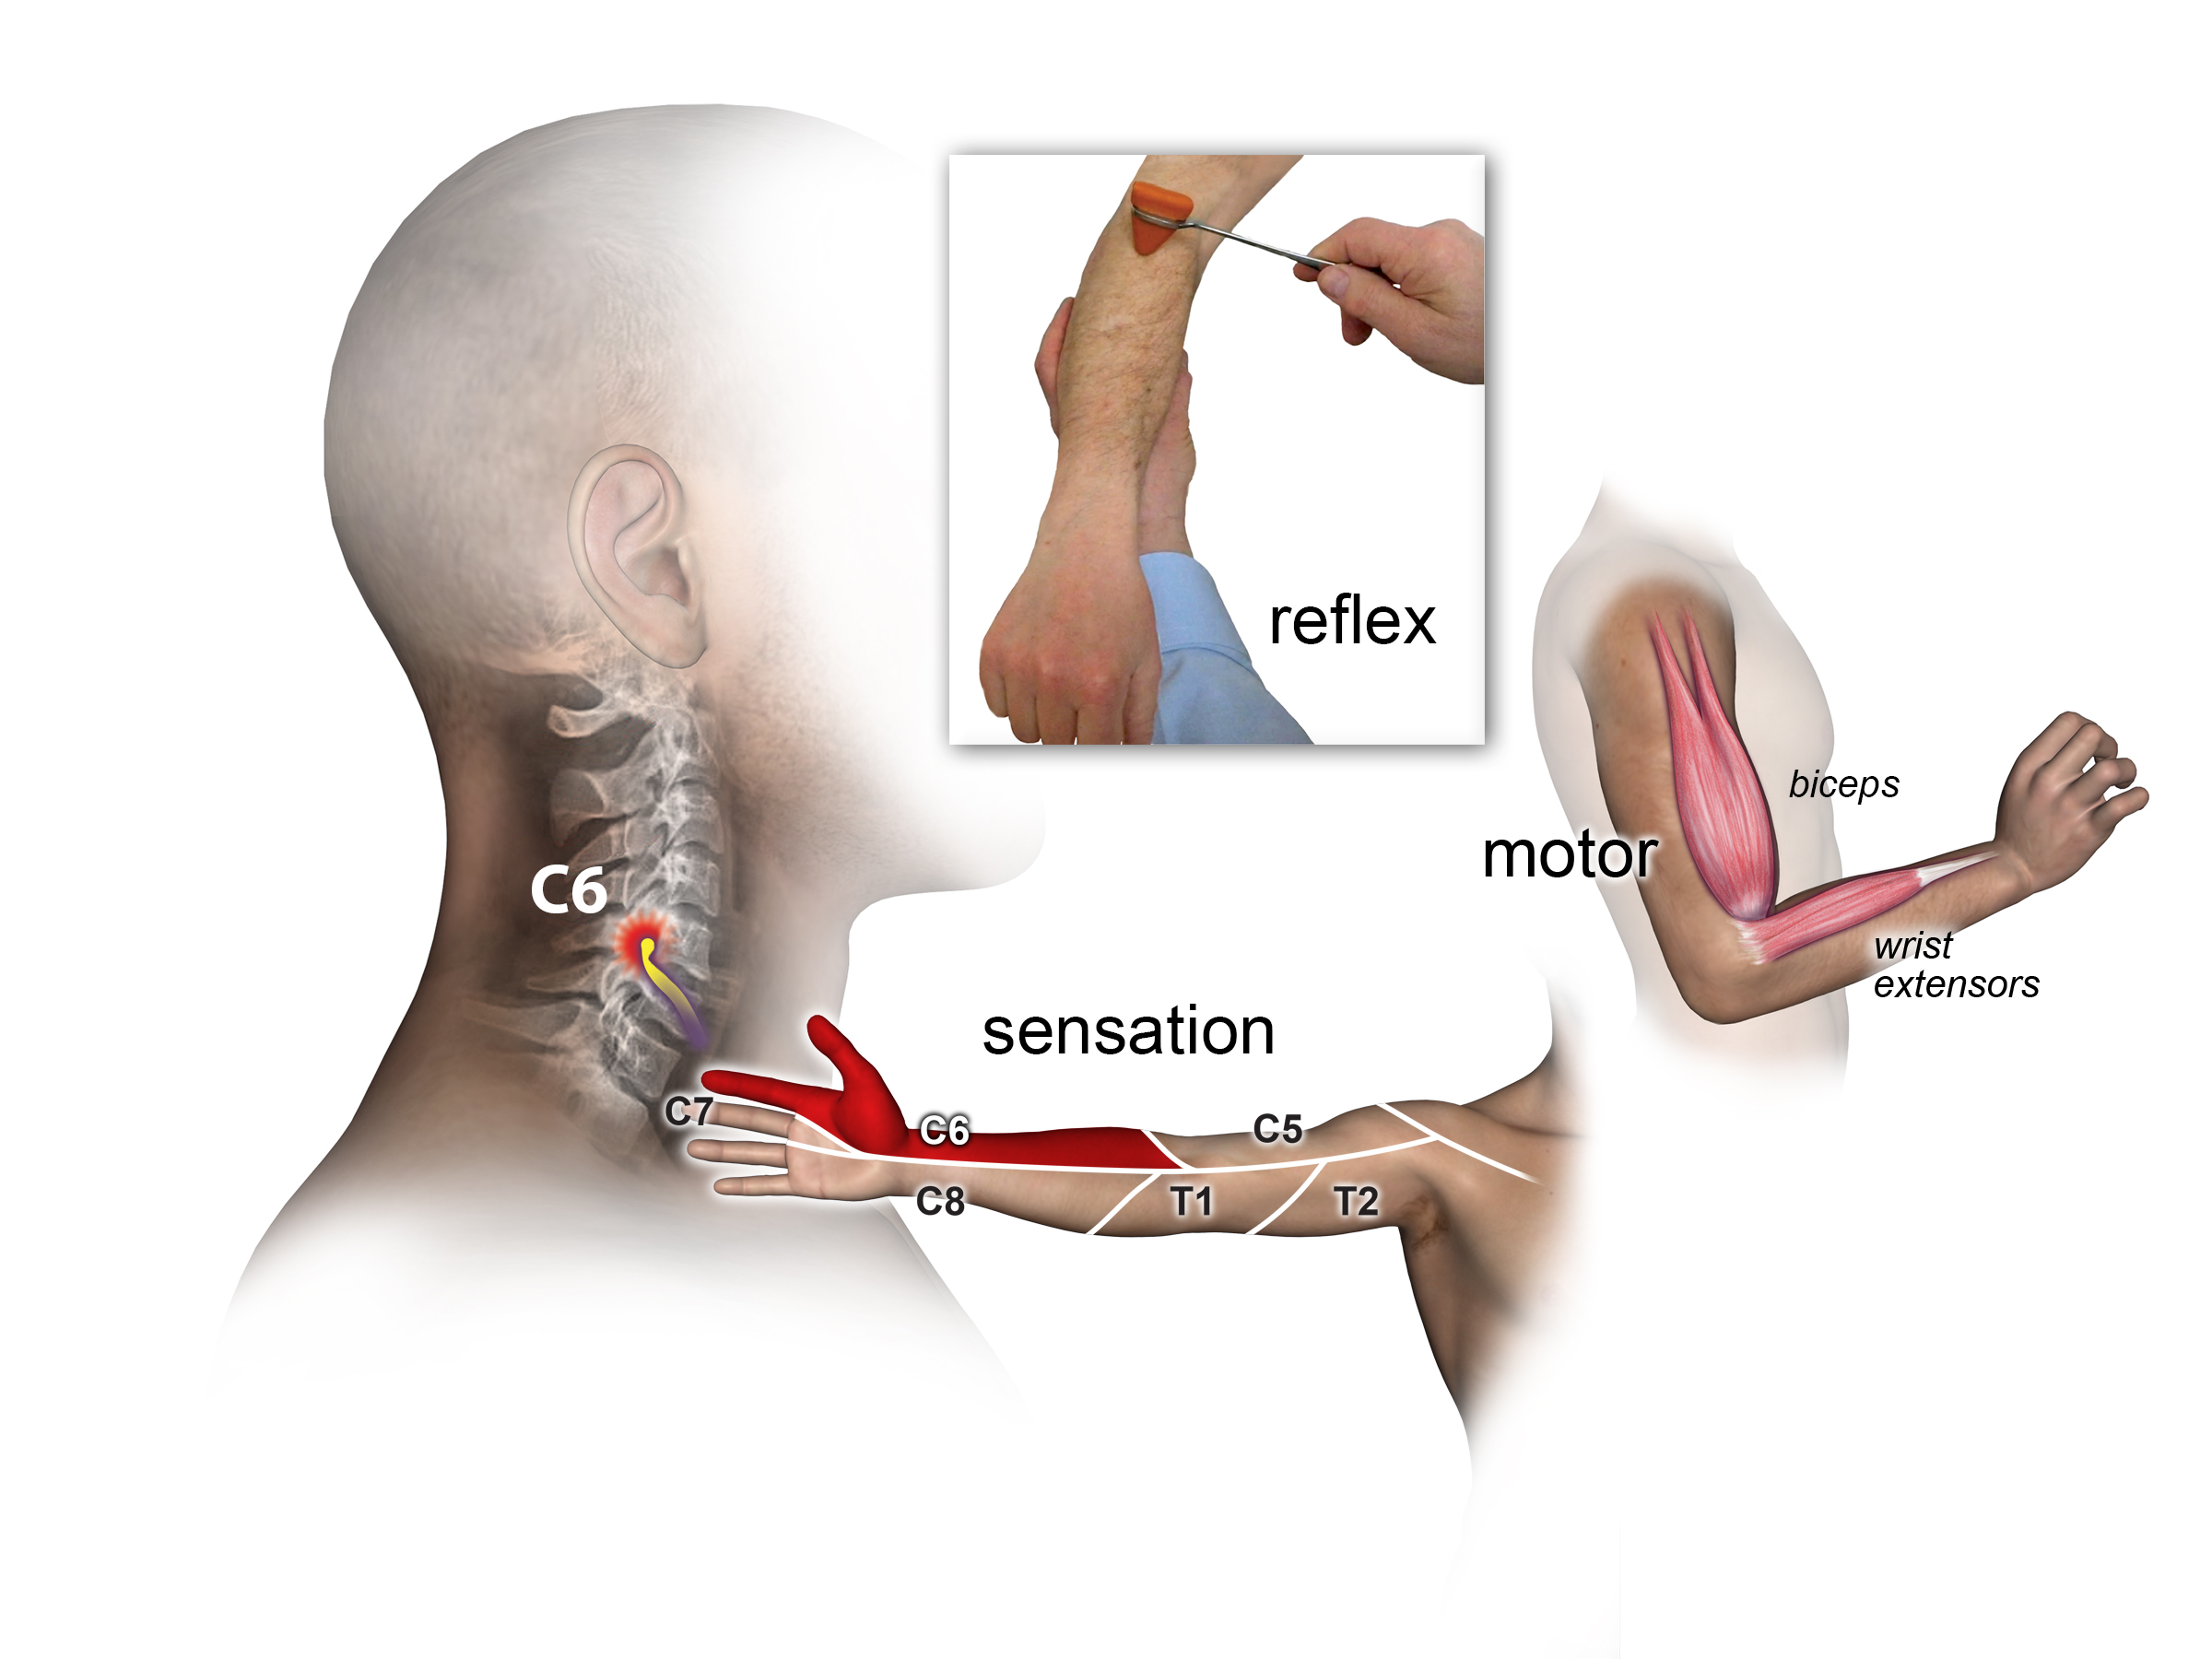 Motor, sensory and triceps reflex exam for C6 Root